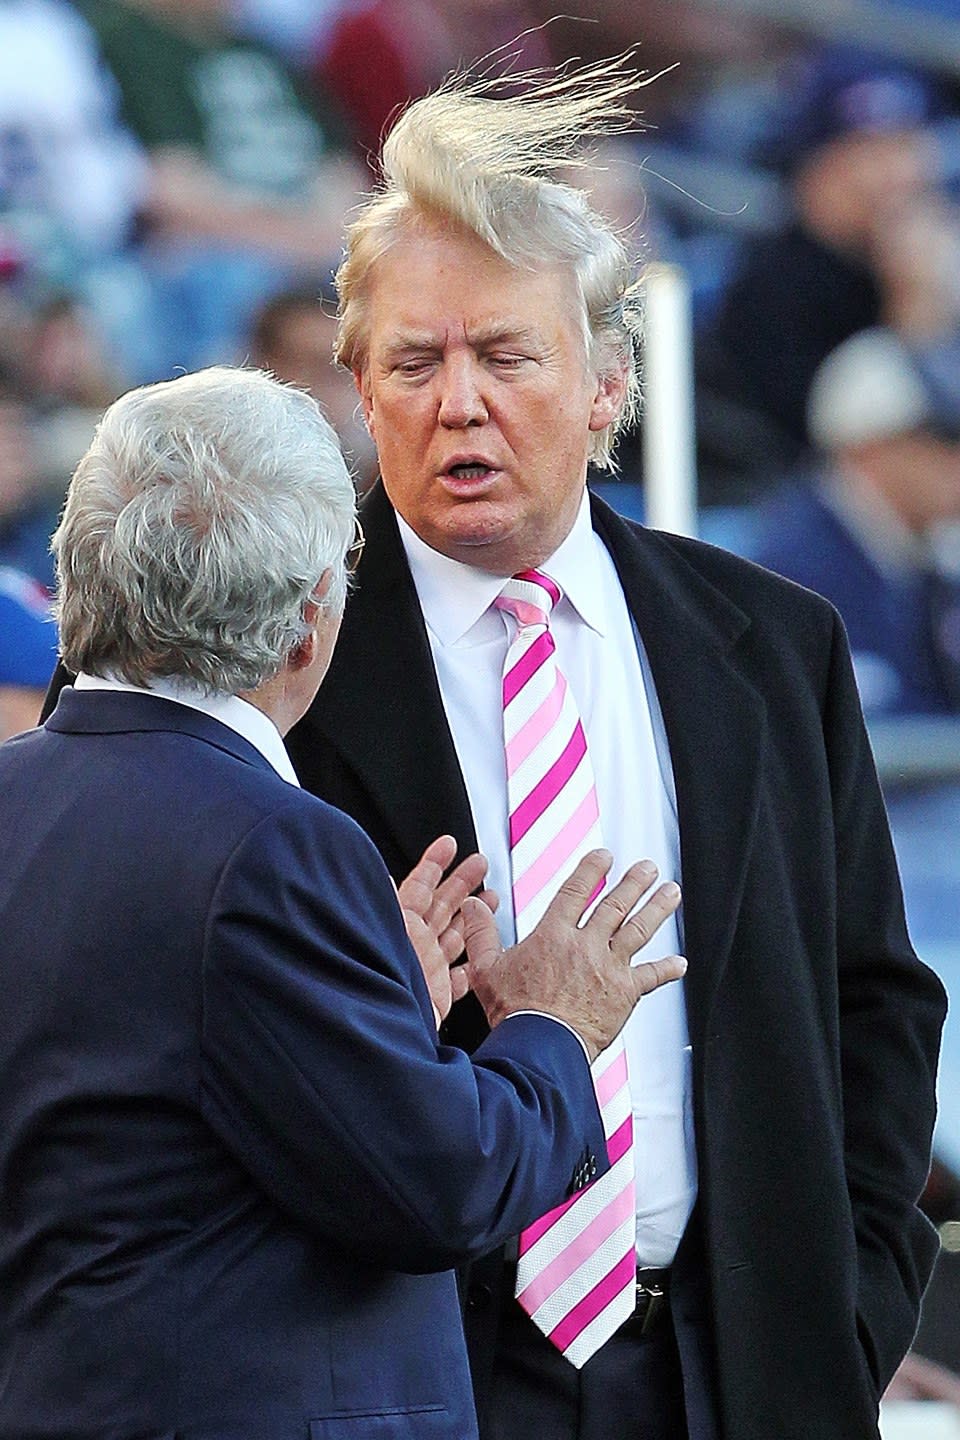 Losing to wind while he talks to Patriots owner Robert Kraft before a game.